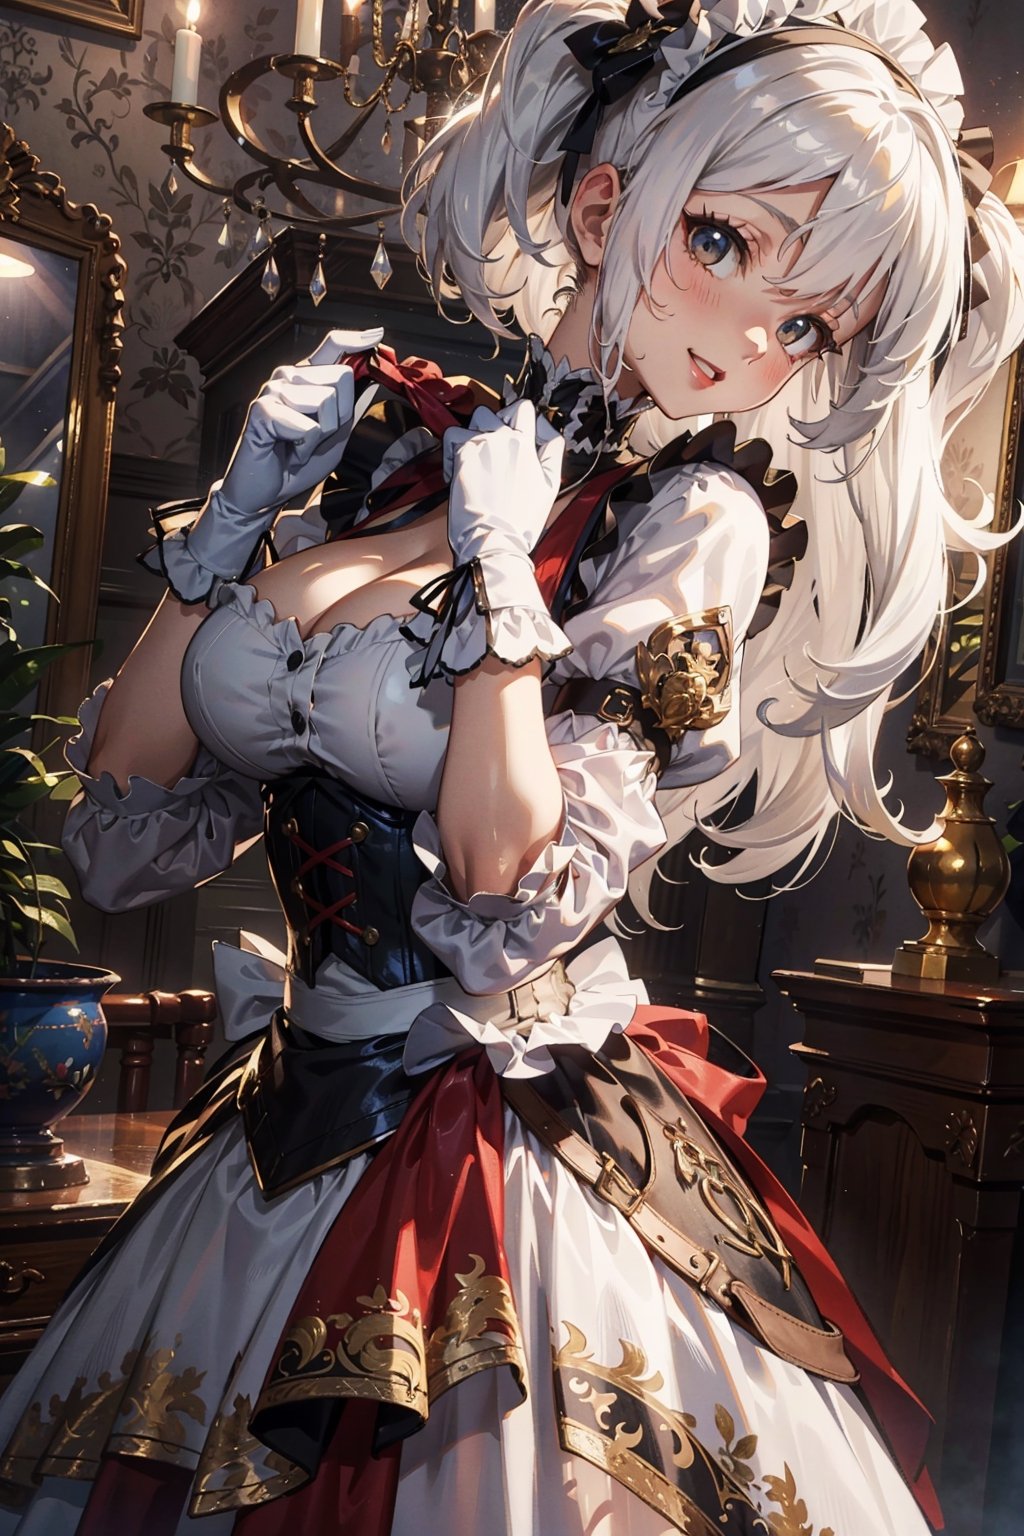 Imagine this. Upscaled, ((( white hair))), 2girls maid with blood in her face, gore, guro, (Masterpiece, best quality, high resolution, highly detailed), Indoors detailed background, perfect lighting. (Hands:1.1), better_hands, gloved hands, better_hands.
Corny Katrina maid with white hair smiling and teasing you with an evil twin. Maid, black dress (dress:1.2), heavy duty working rubber gloves, puffy skirt, long skirt, puffy sleeves, long sleeves, Juliet sleeves, buttoned blouse with Victorian neck, tight corset, (huge breasts:1.1), breastfeeding chest. Indoors, (renaissance, vintage:1.2), ornate walls, 
By Paracosmos. 
,nodf_lora,LatexConcept